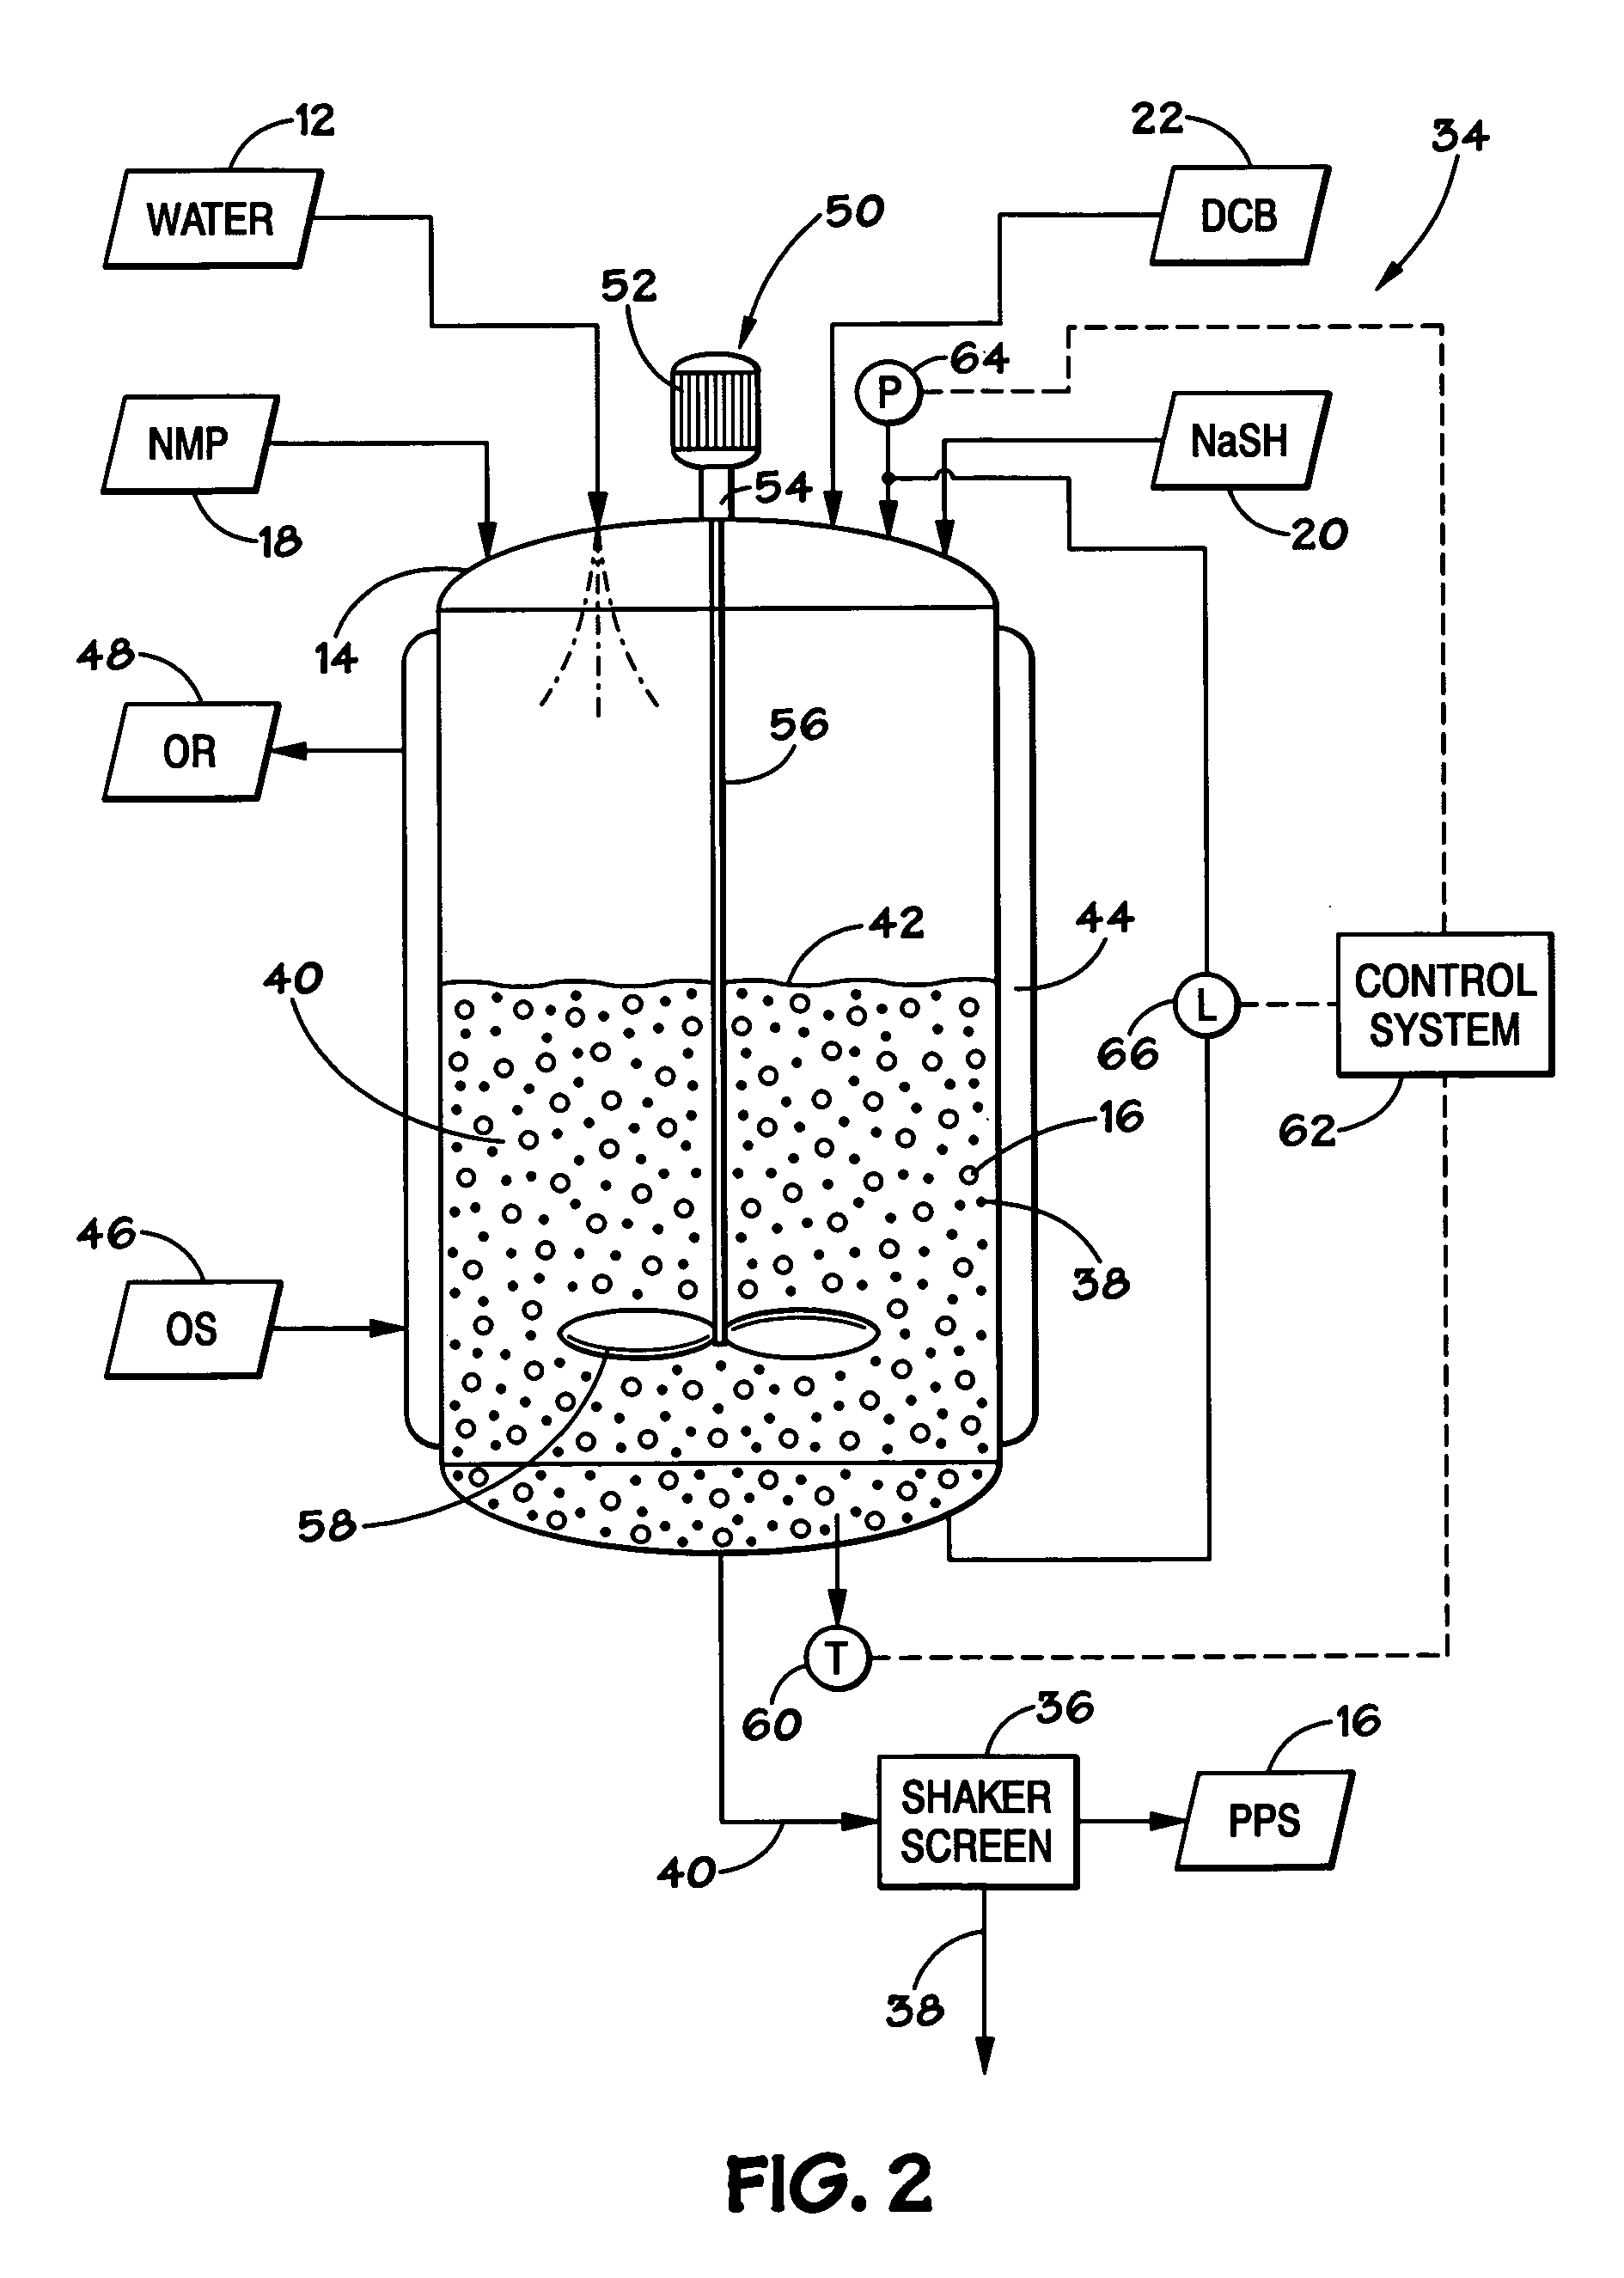 Inferred water analysis in polyphenylene sulfide production